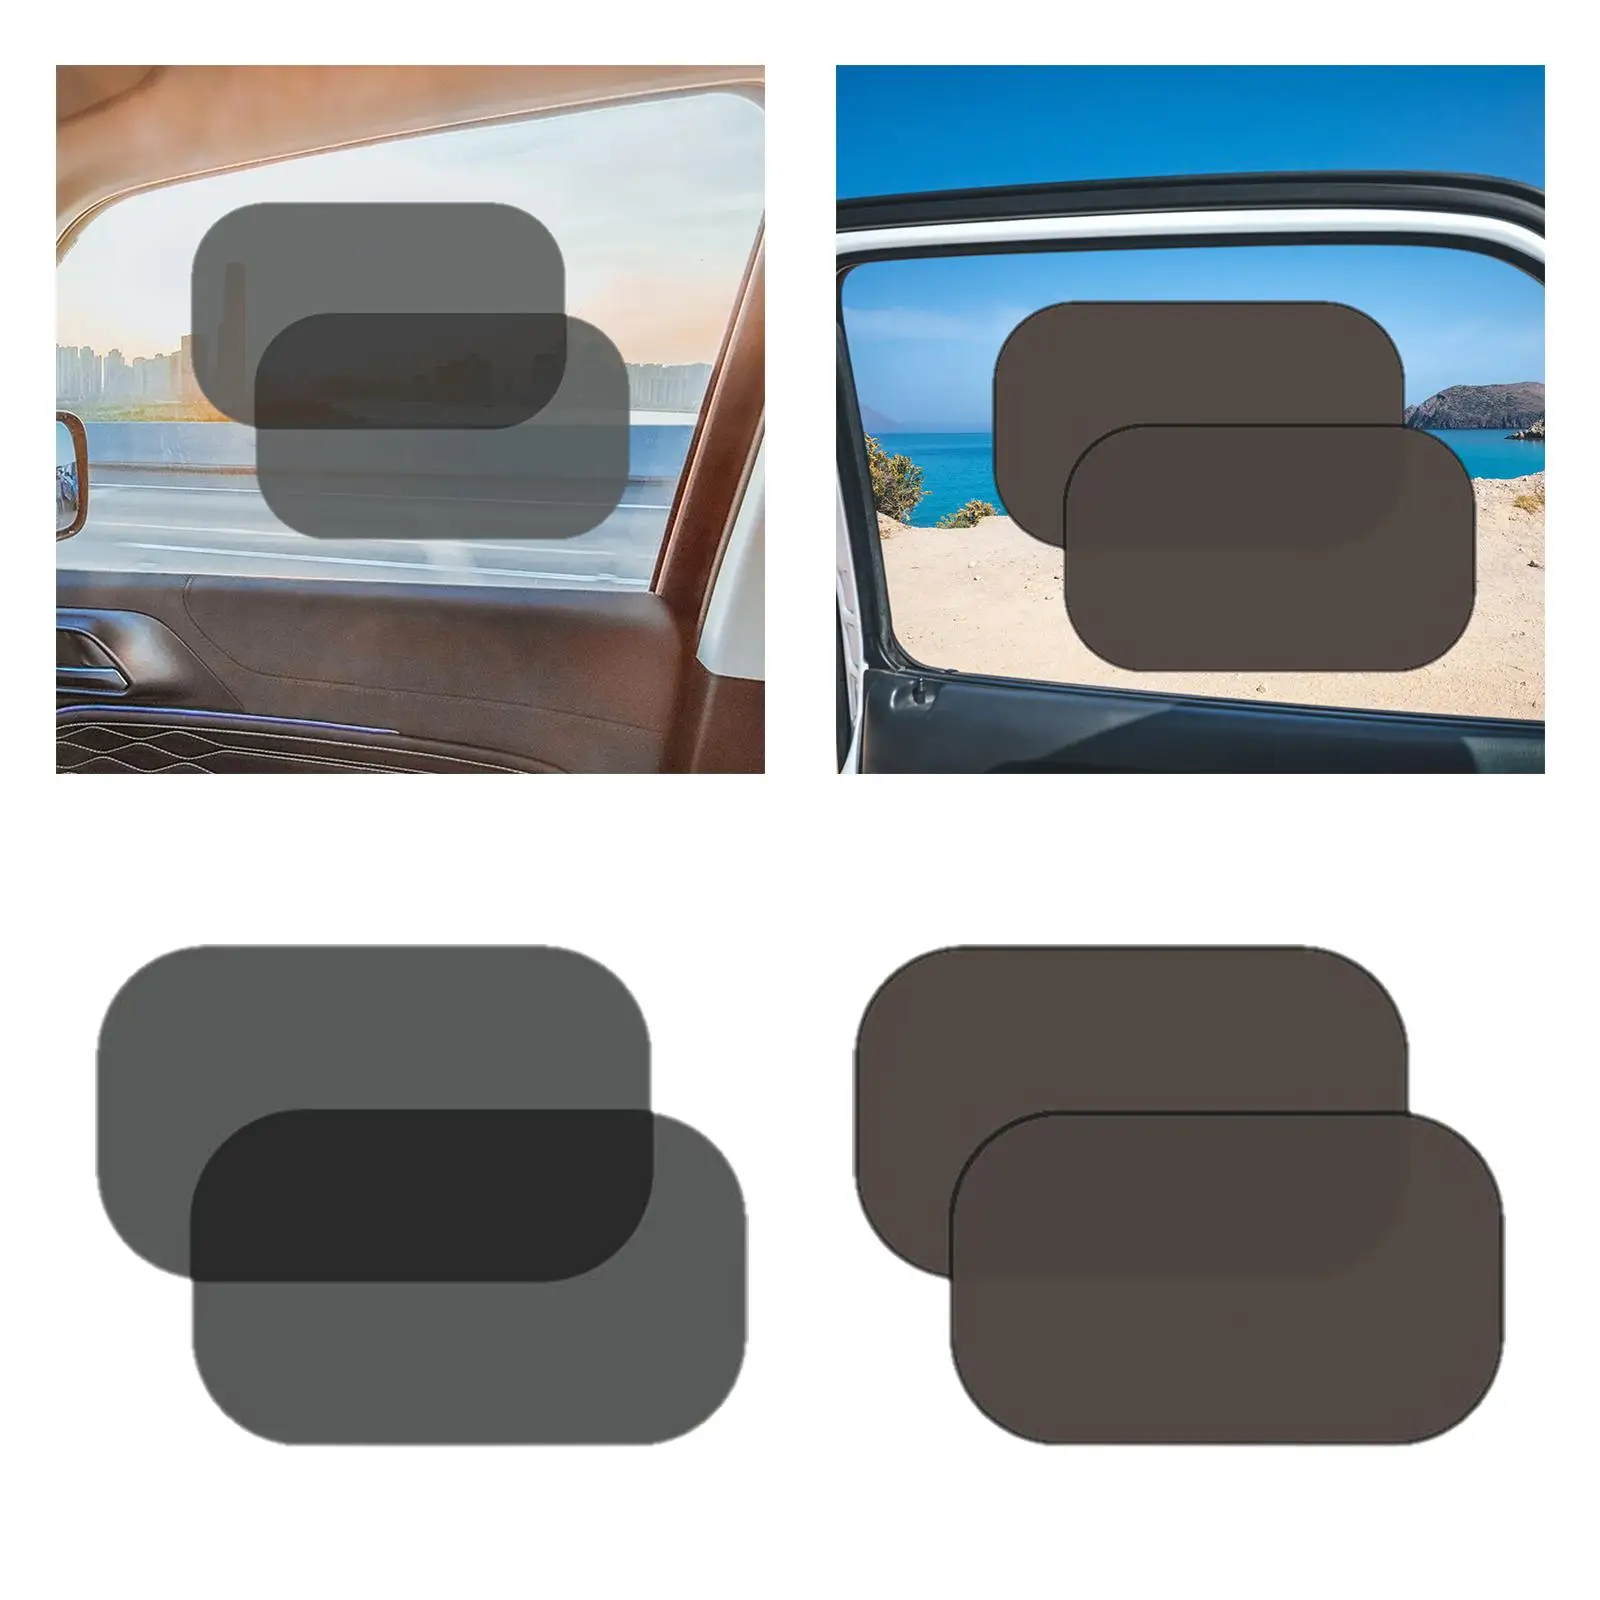 2 Pieces Car Window Shade Static Cling Surface for Most Cars Taking A Nap Changing Clothes SUV Keeps Your Vehicle Cool